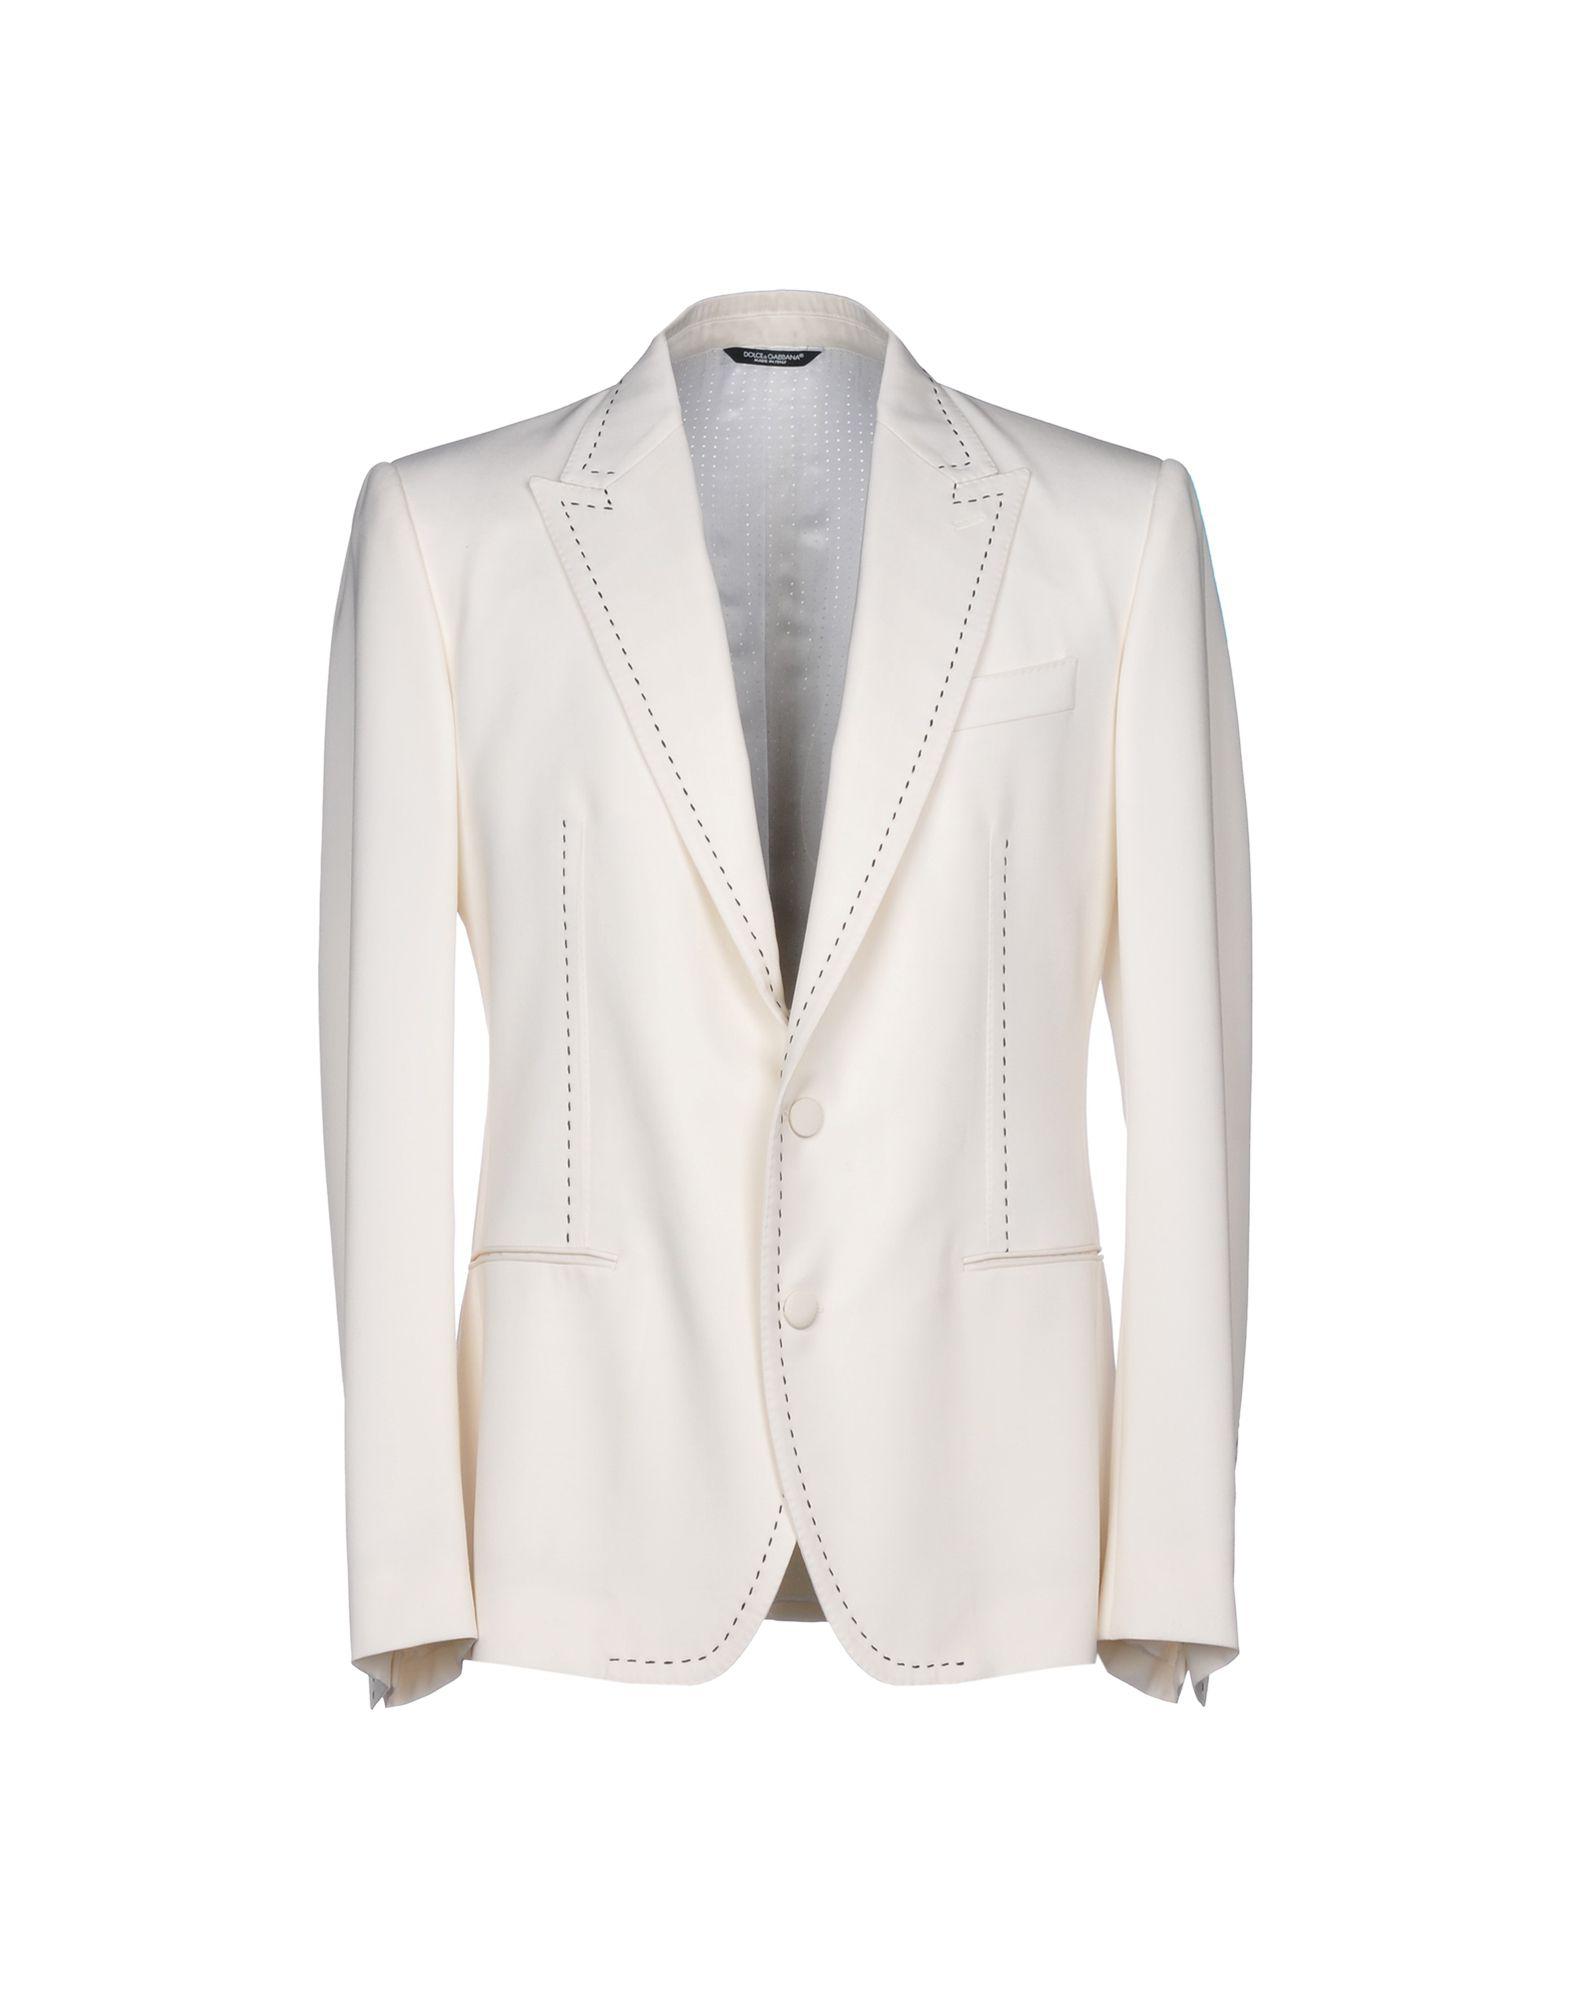 Dolce & Gabbana Wool Suit Jacket in Ivory (White) for Men - Lyst